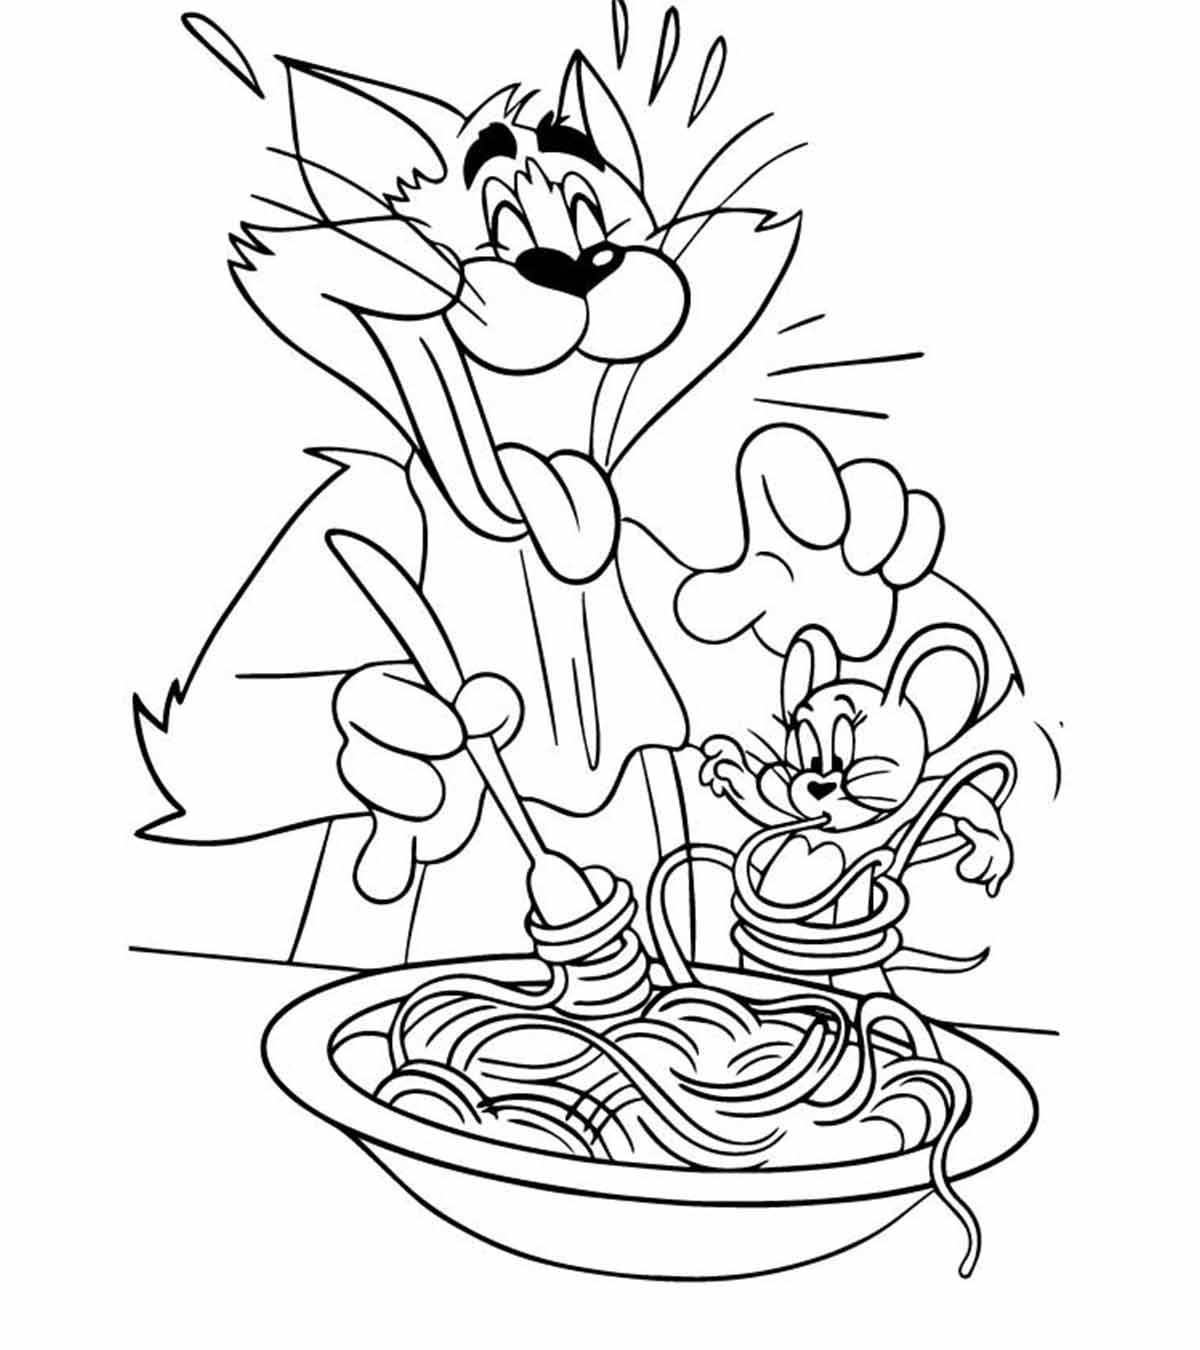 Download Tom And Jerry Cartoon Coloring Book Pdf - Coloring Paper